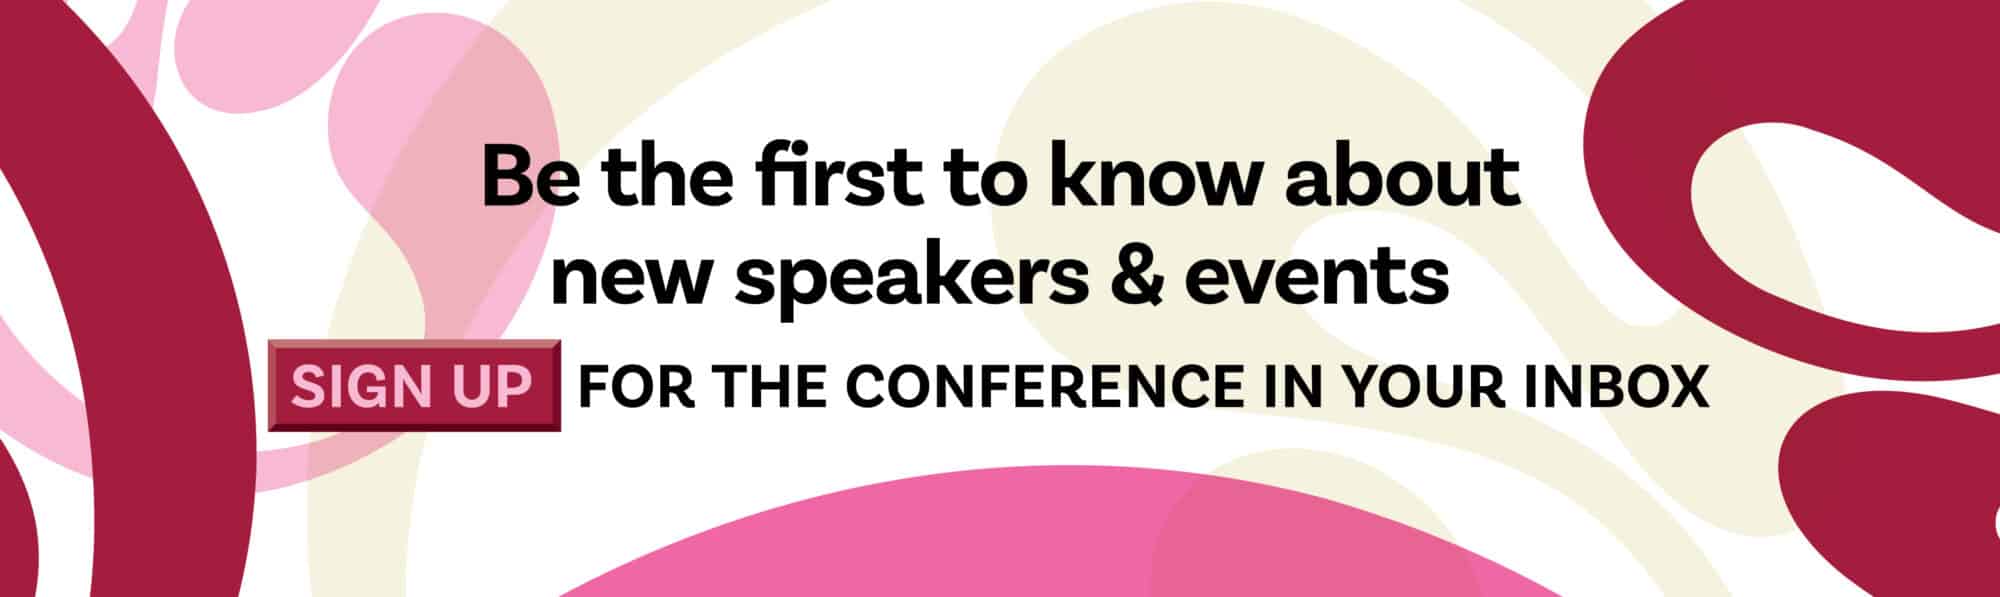 Be the first to know about new speakers and events by signing up for the Conference in Your Inbox